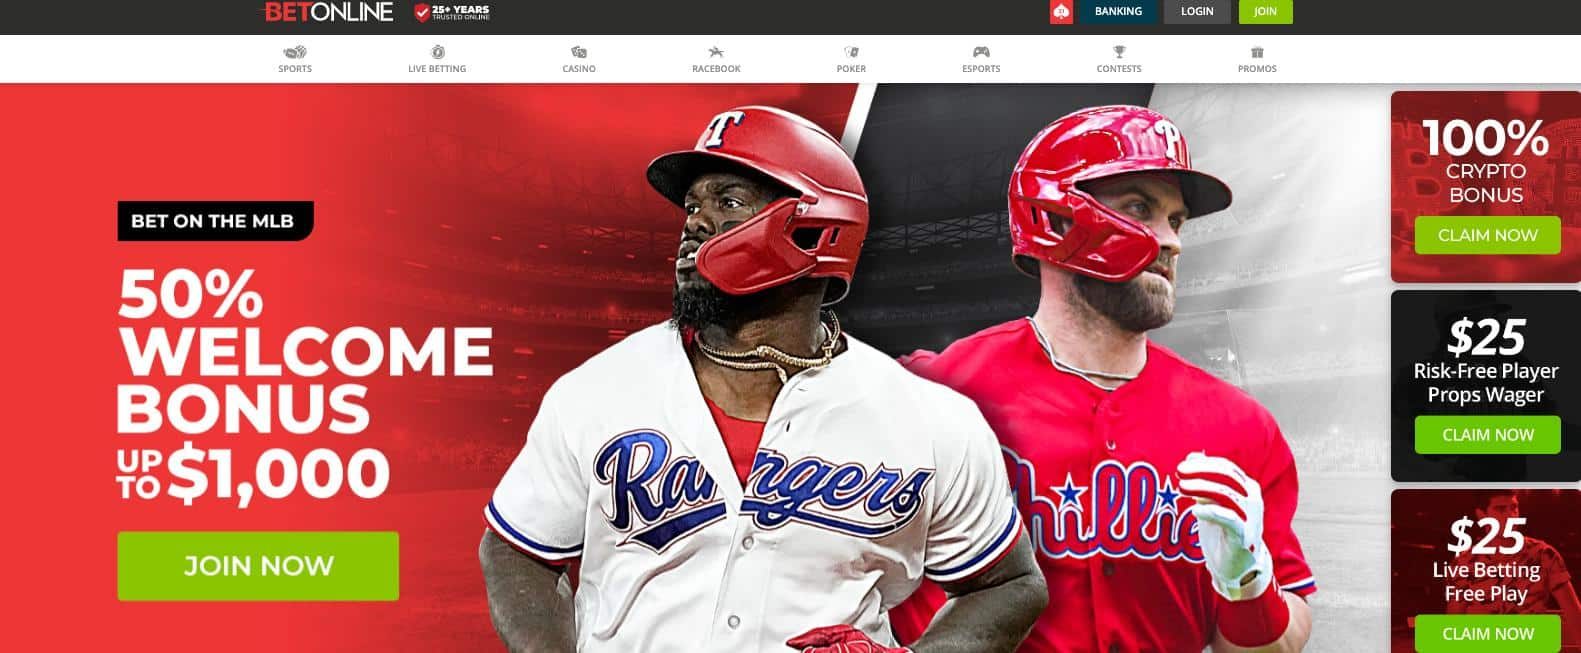 MLB marketing in 2022 beer deals crypto streaming gambling and more   Ad Age